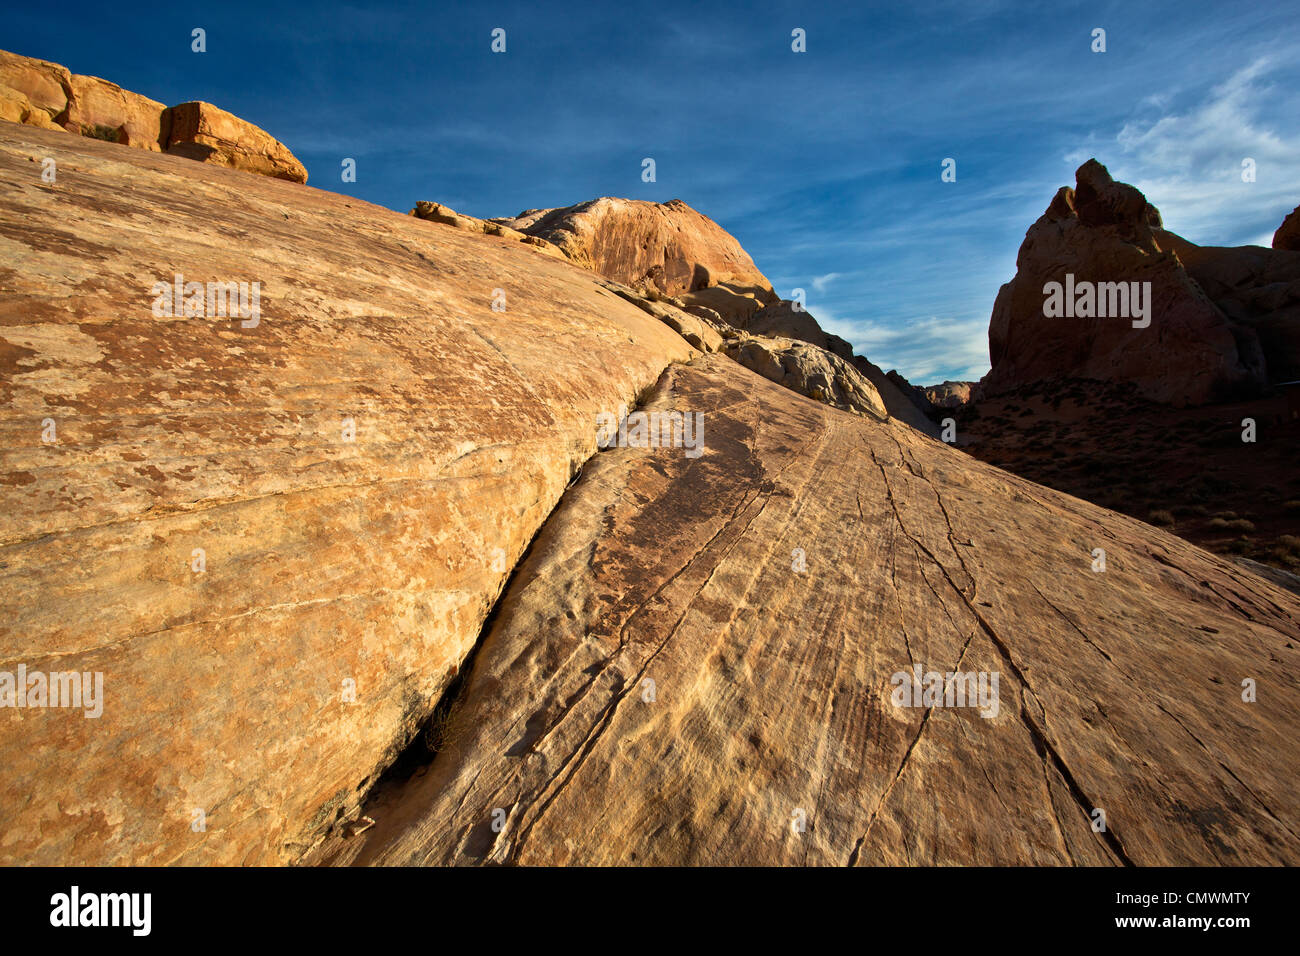 Sandstone Rock formations in Nevada's Valley of Fire Stock Photo